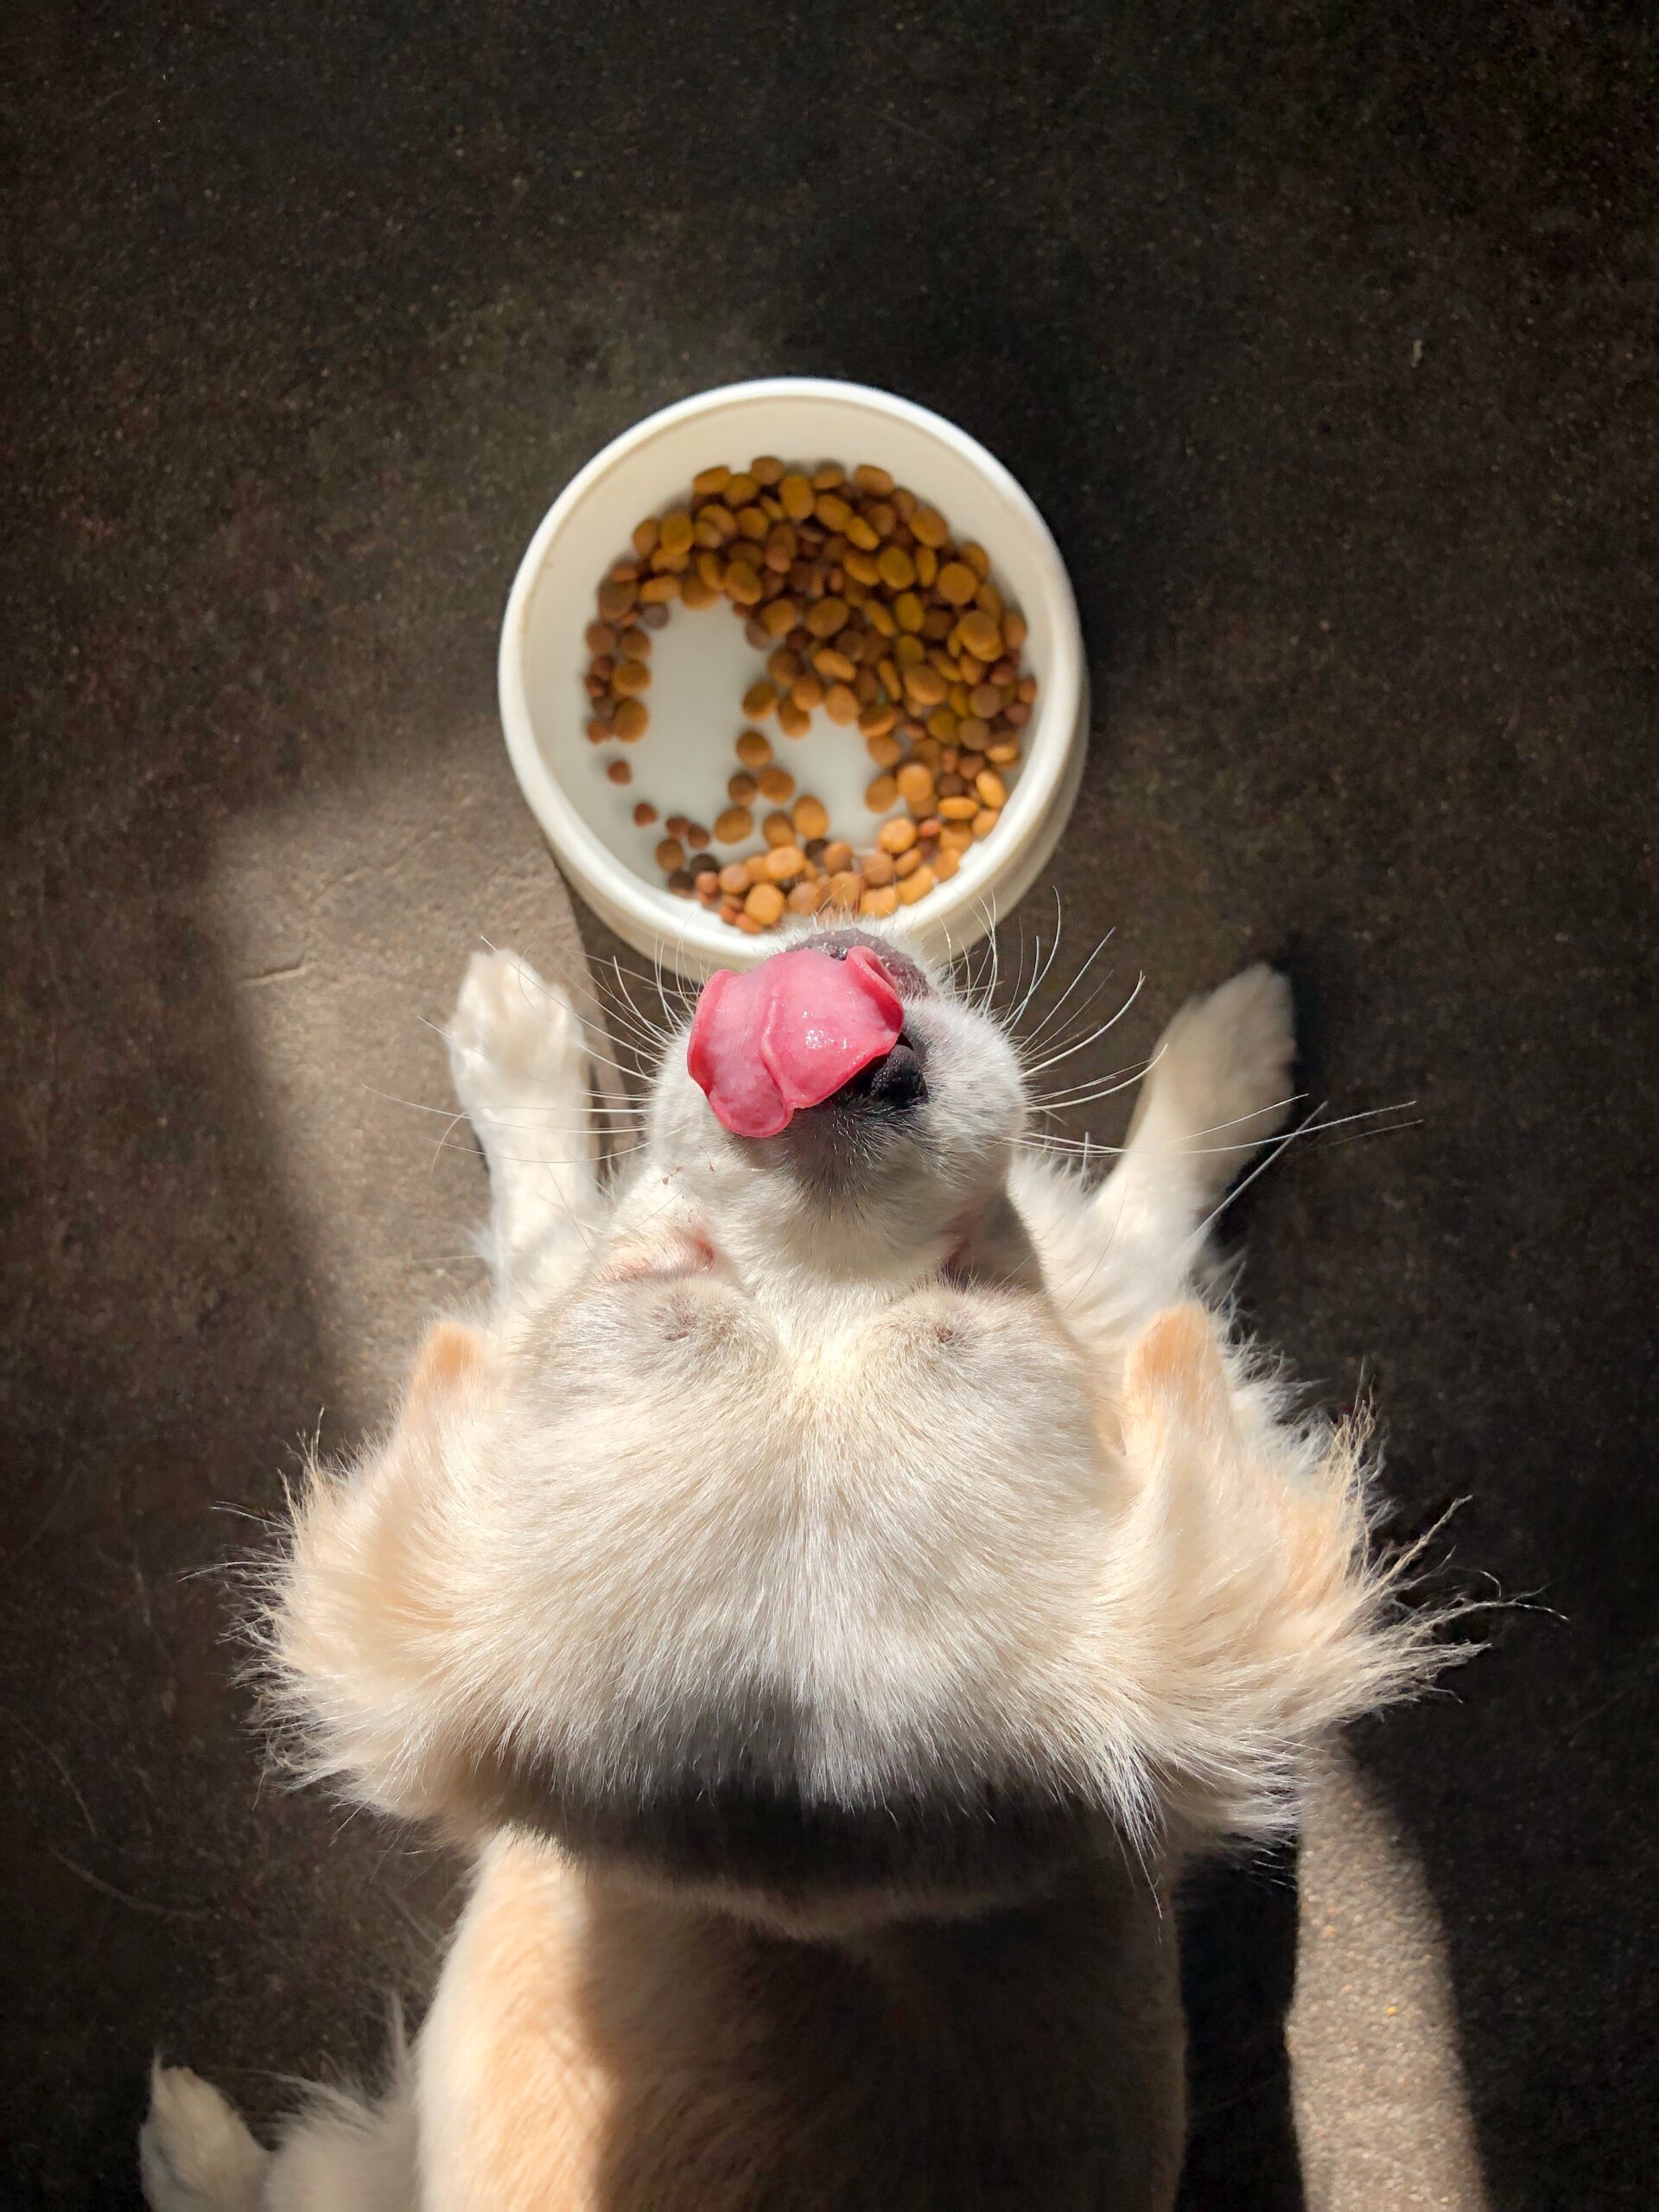 Can adding water to dry dog food cause Diarrhea